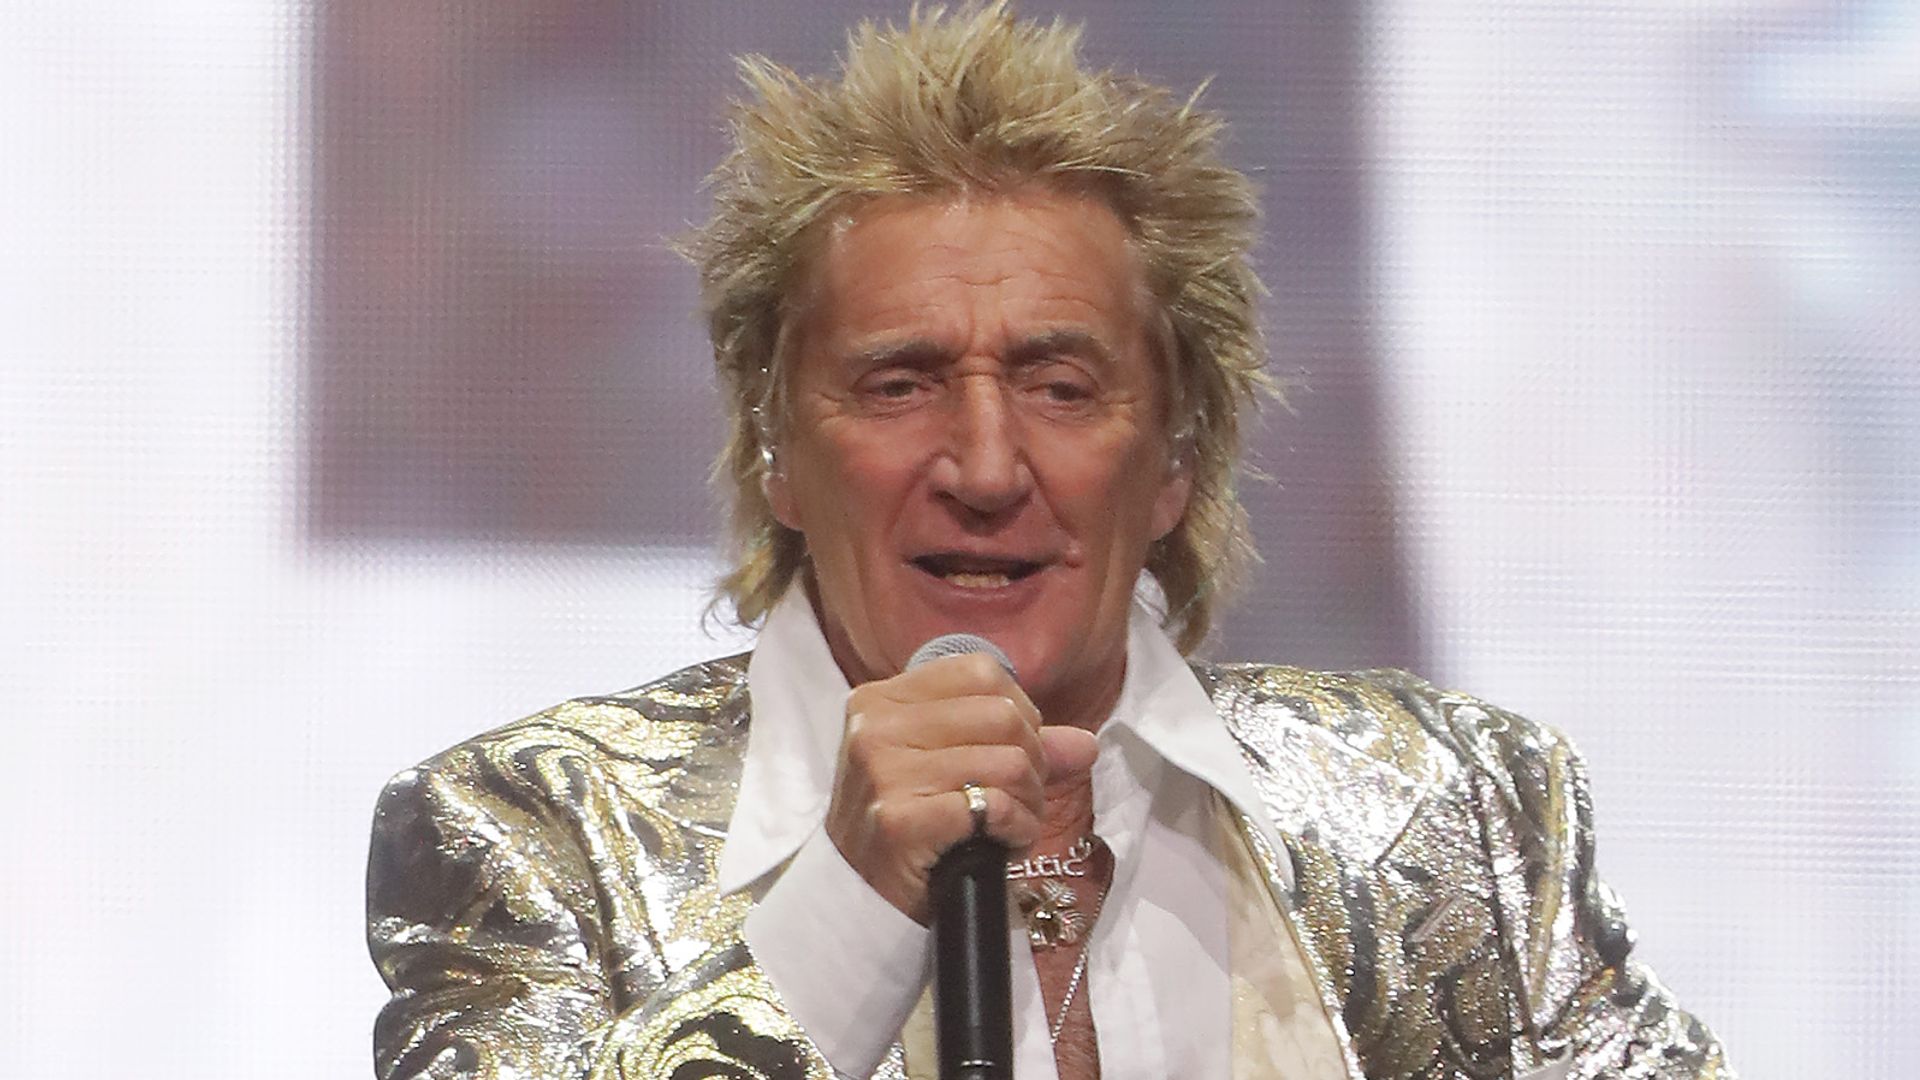 Rod Stewart's most heartwarming photos with his 4 lookalike sons